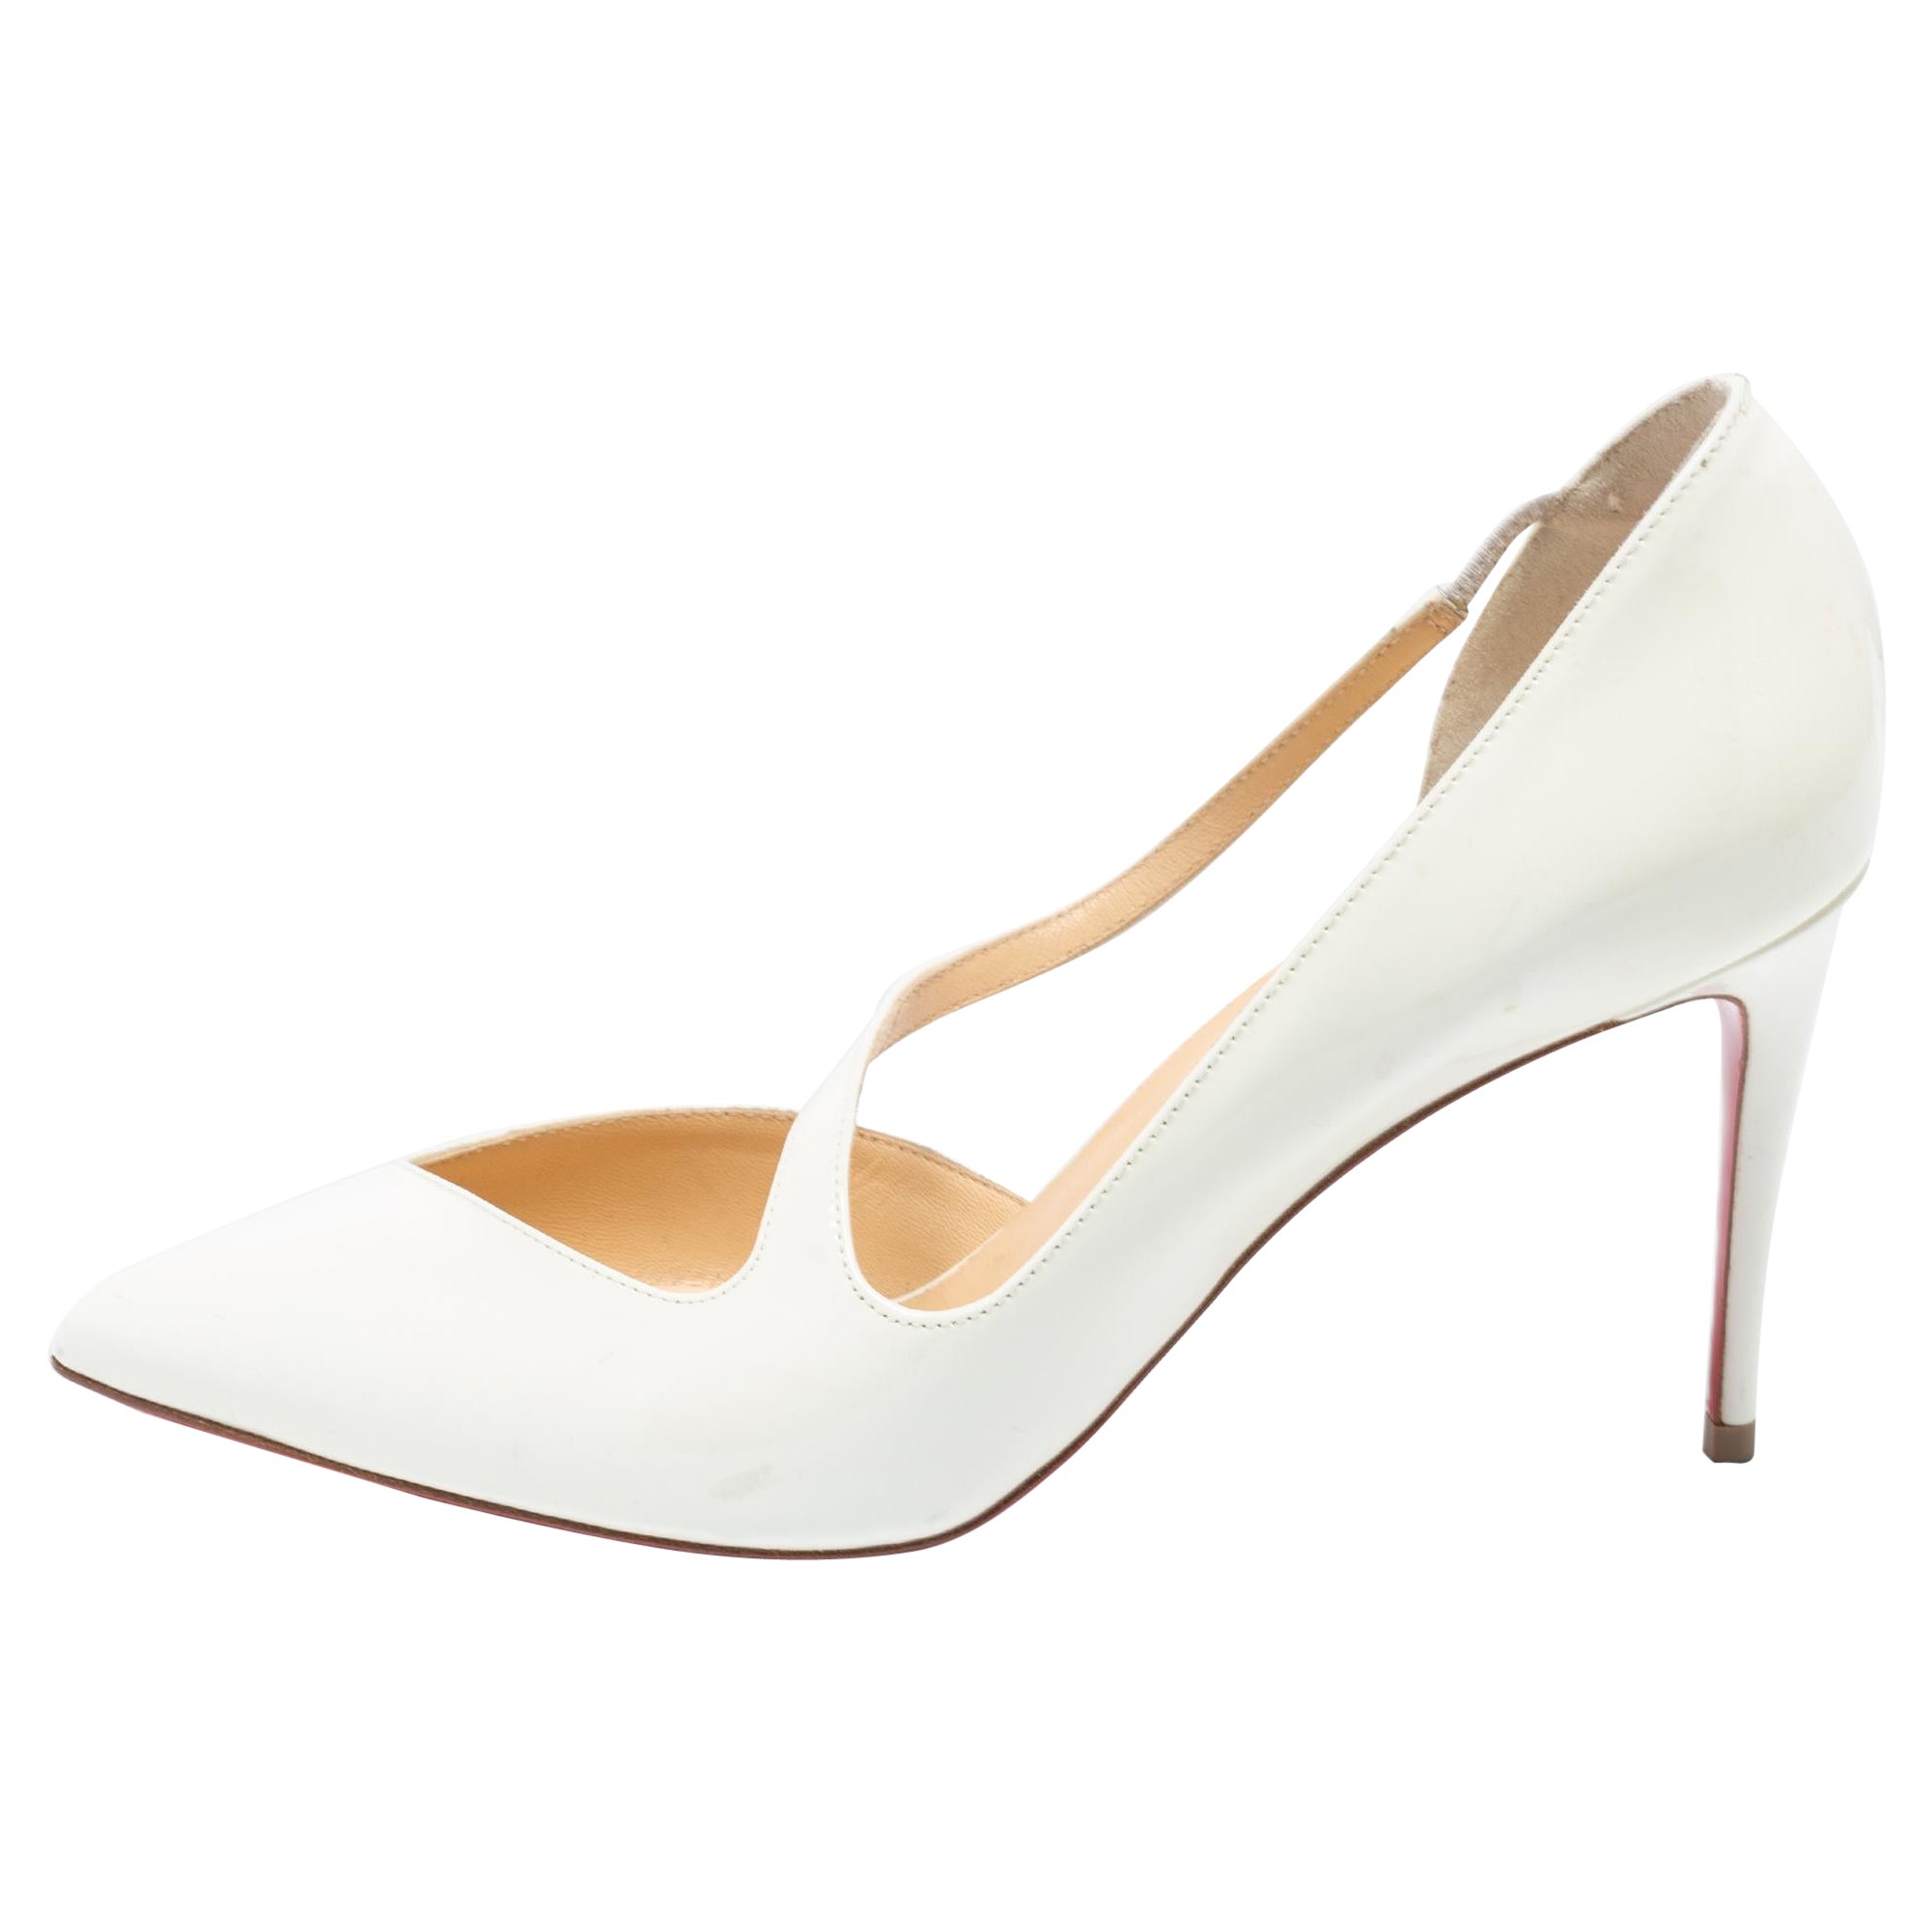 Christian Louboutin Off-White Patent Leather Jumping D'orsay Pumps Size 38.5